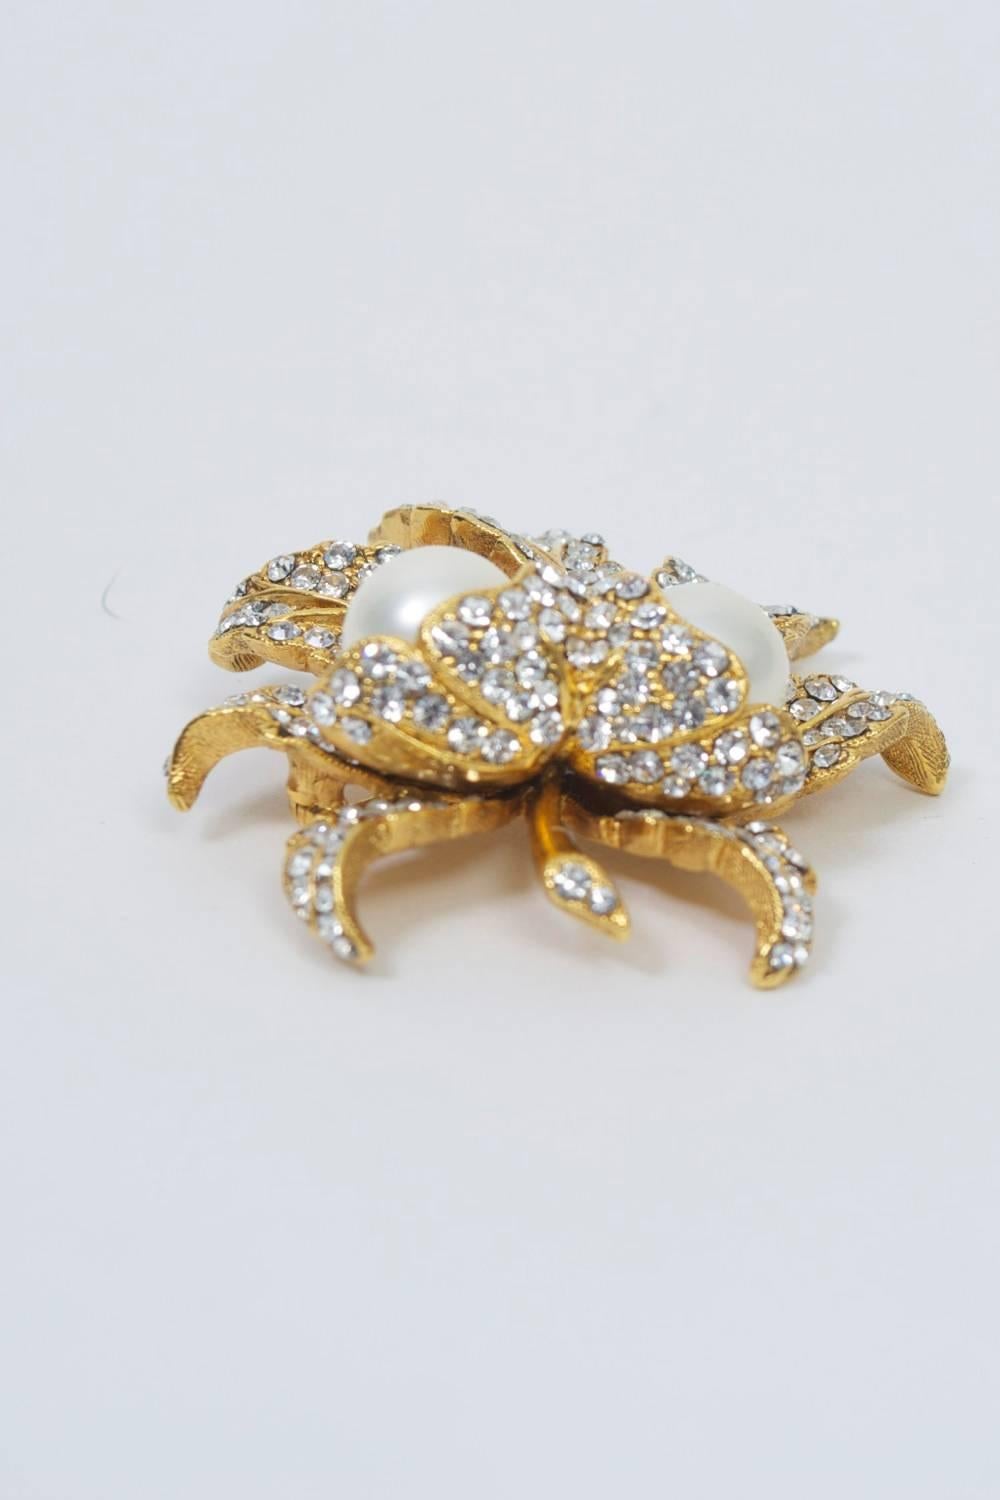 Leaf brooch in textured gold, each leaf set with rhinestones and with two large pearls at center.